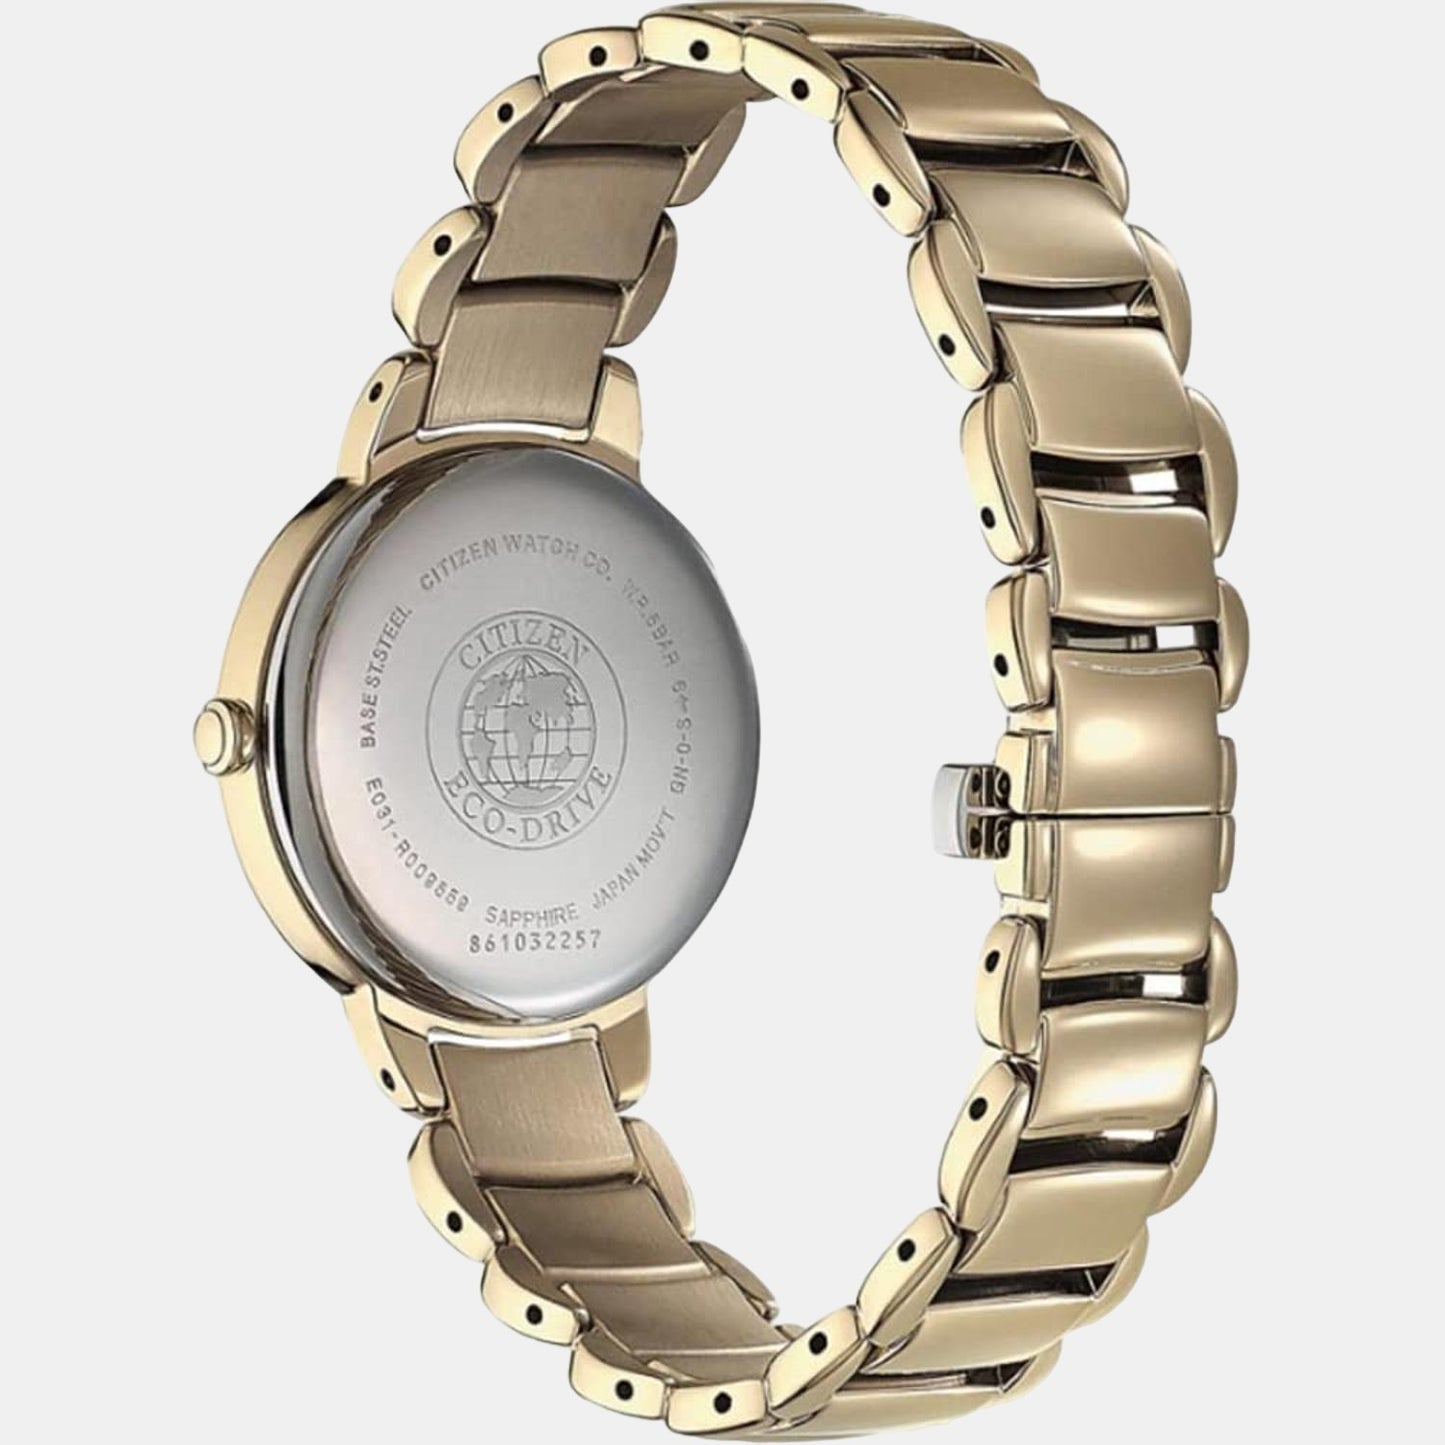 citizen-stainless-steel-mother-of-pearl-analog-female-watch-em0673-83d